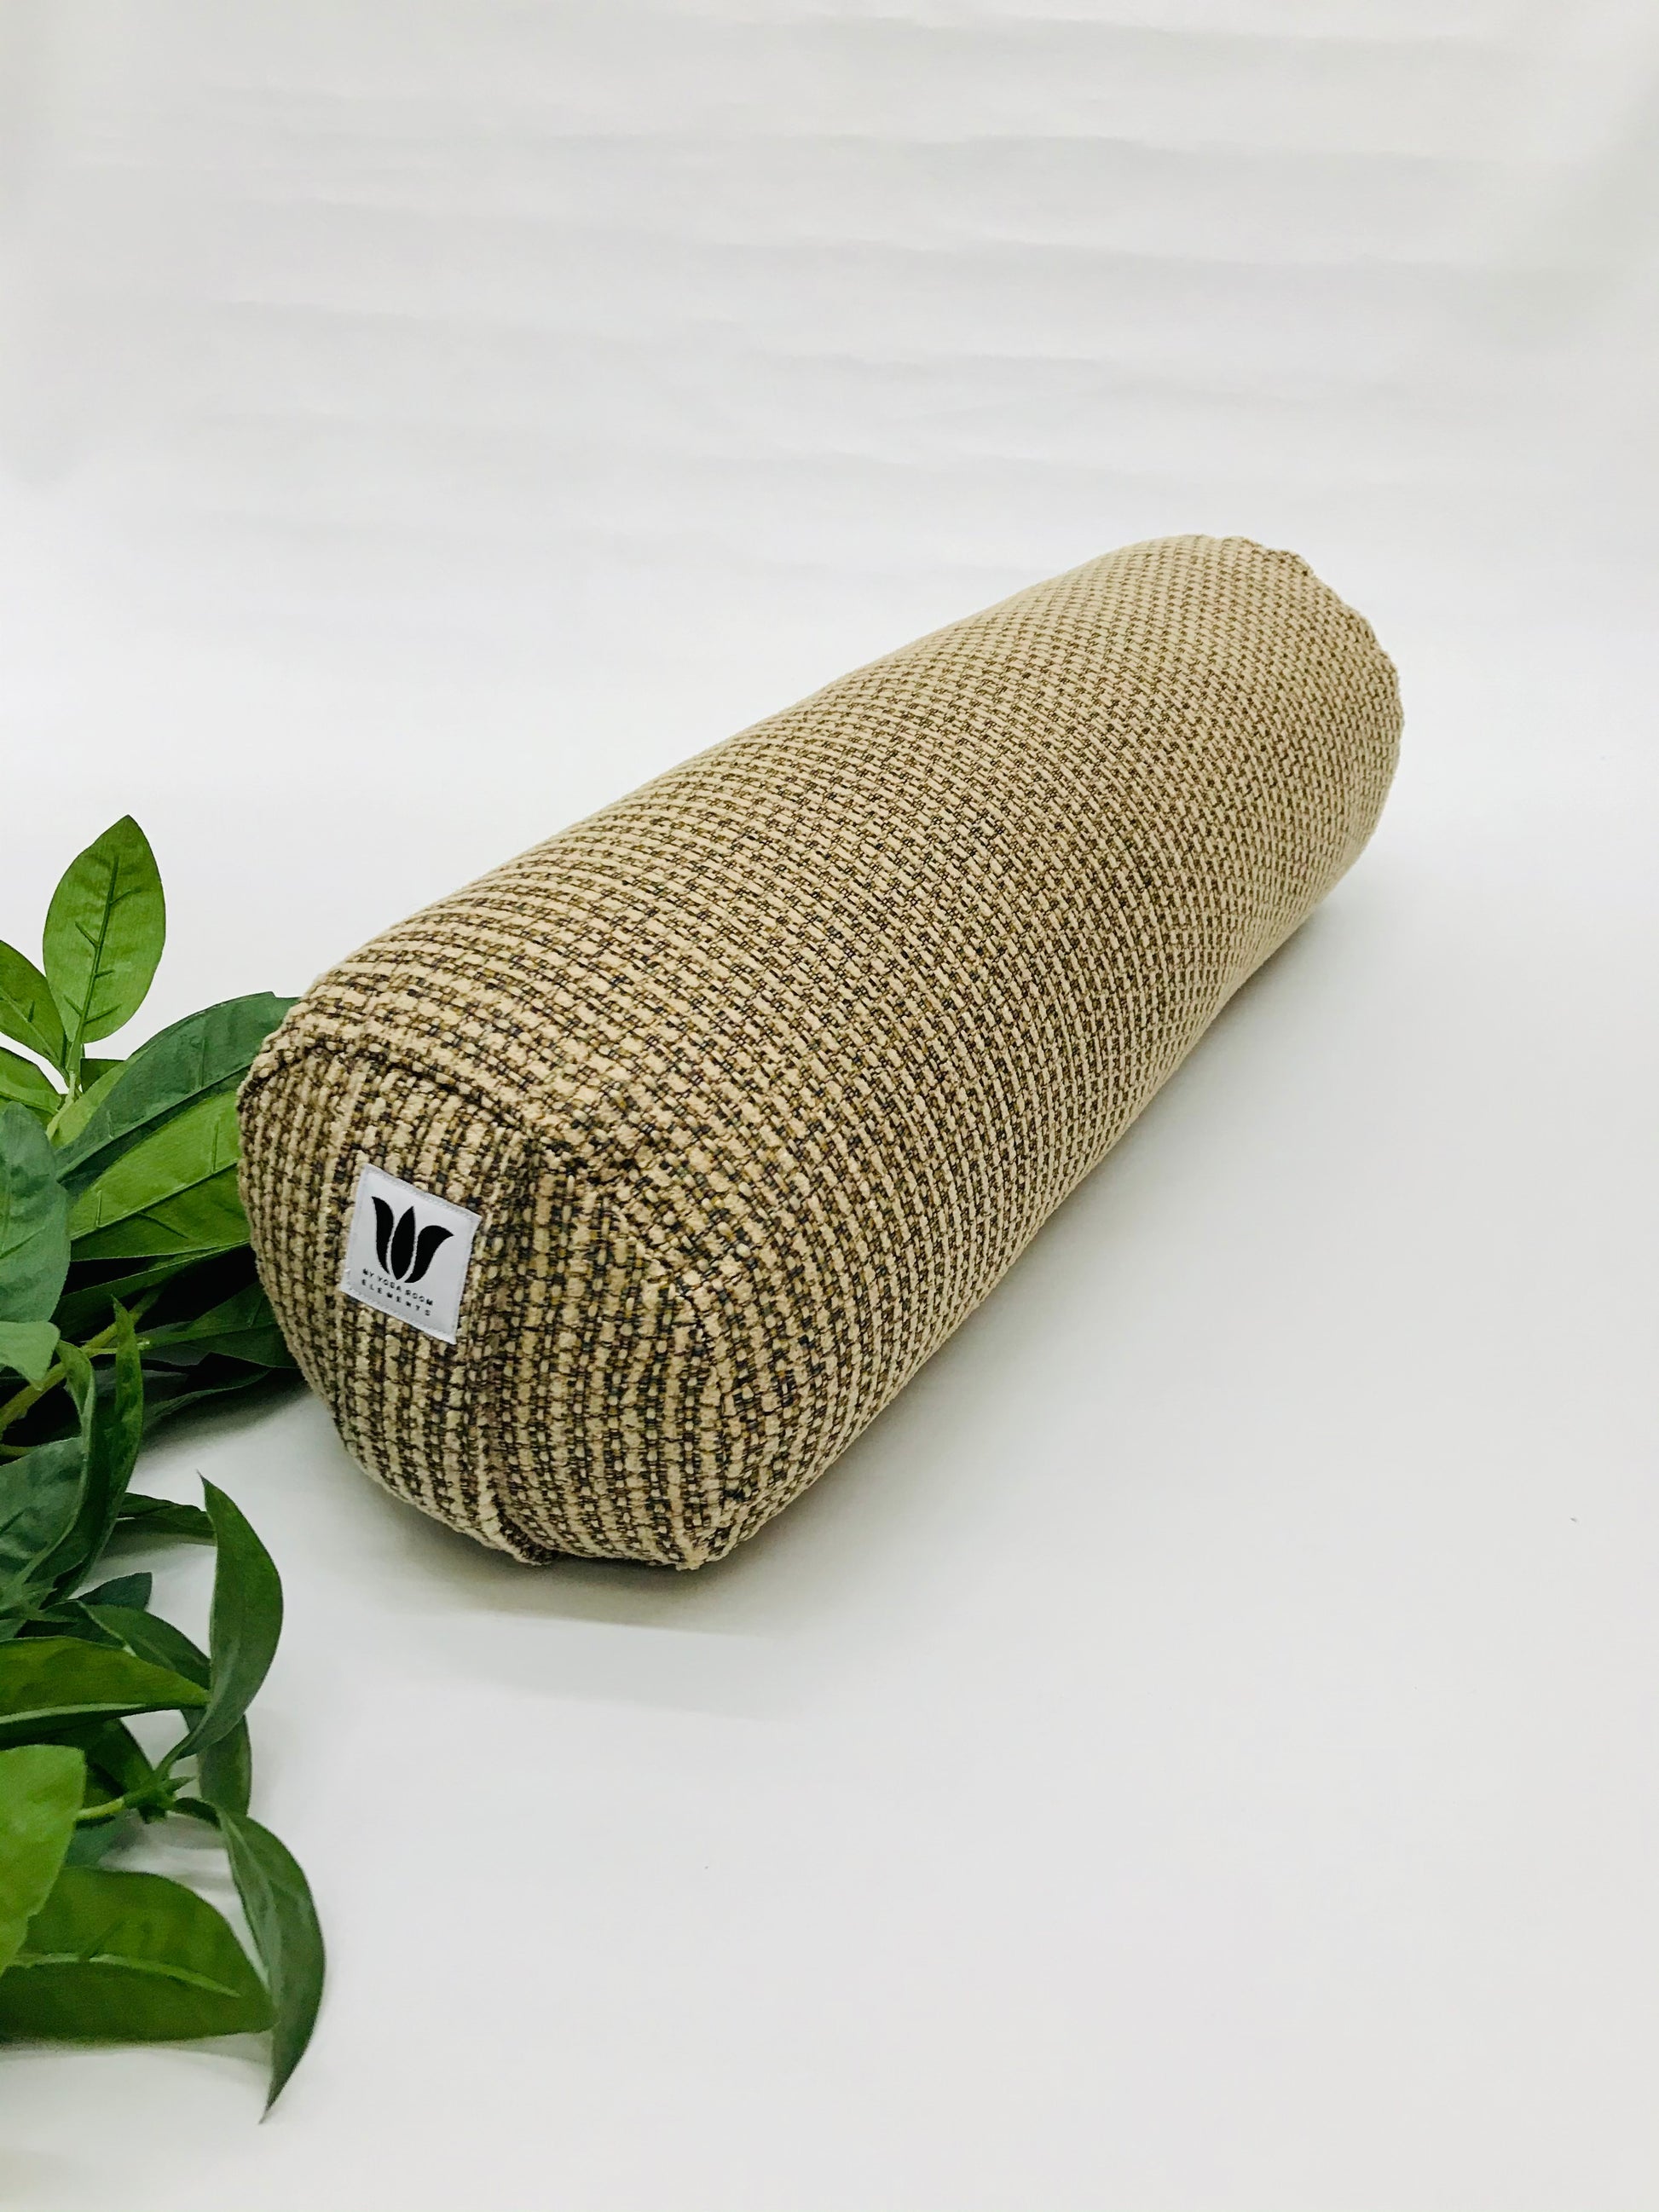 Round yoga bolster in brown durable tweed print fabric . Allergy conscious fill with removeable cover. Made in Canada by My Yoga Room Elements